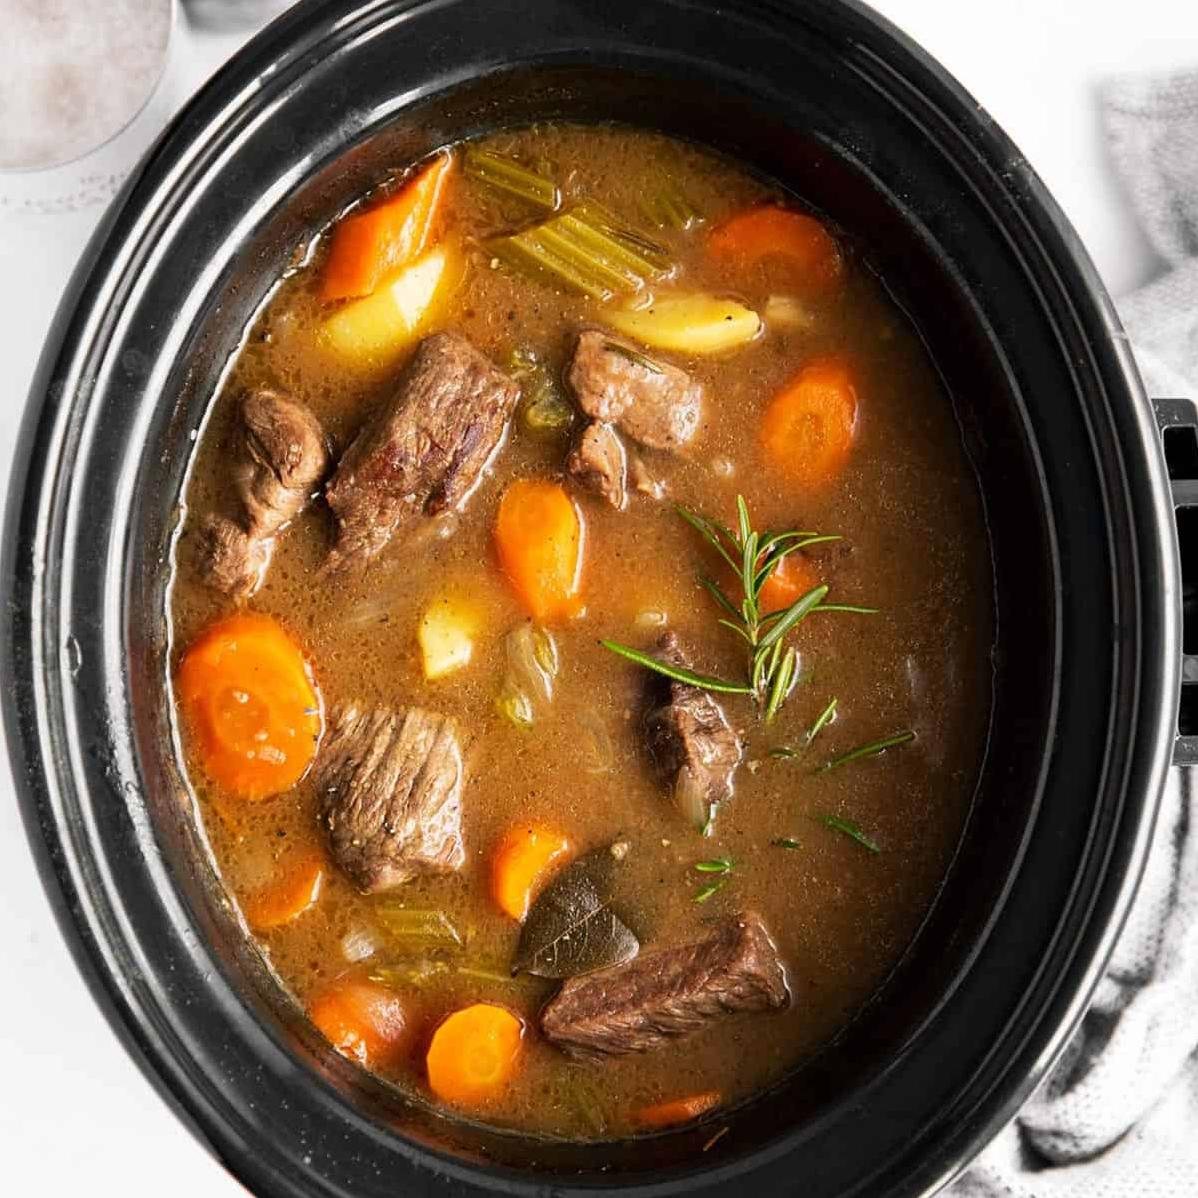  A hearty meal is never complete without Irish Stew in a Crock.